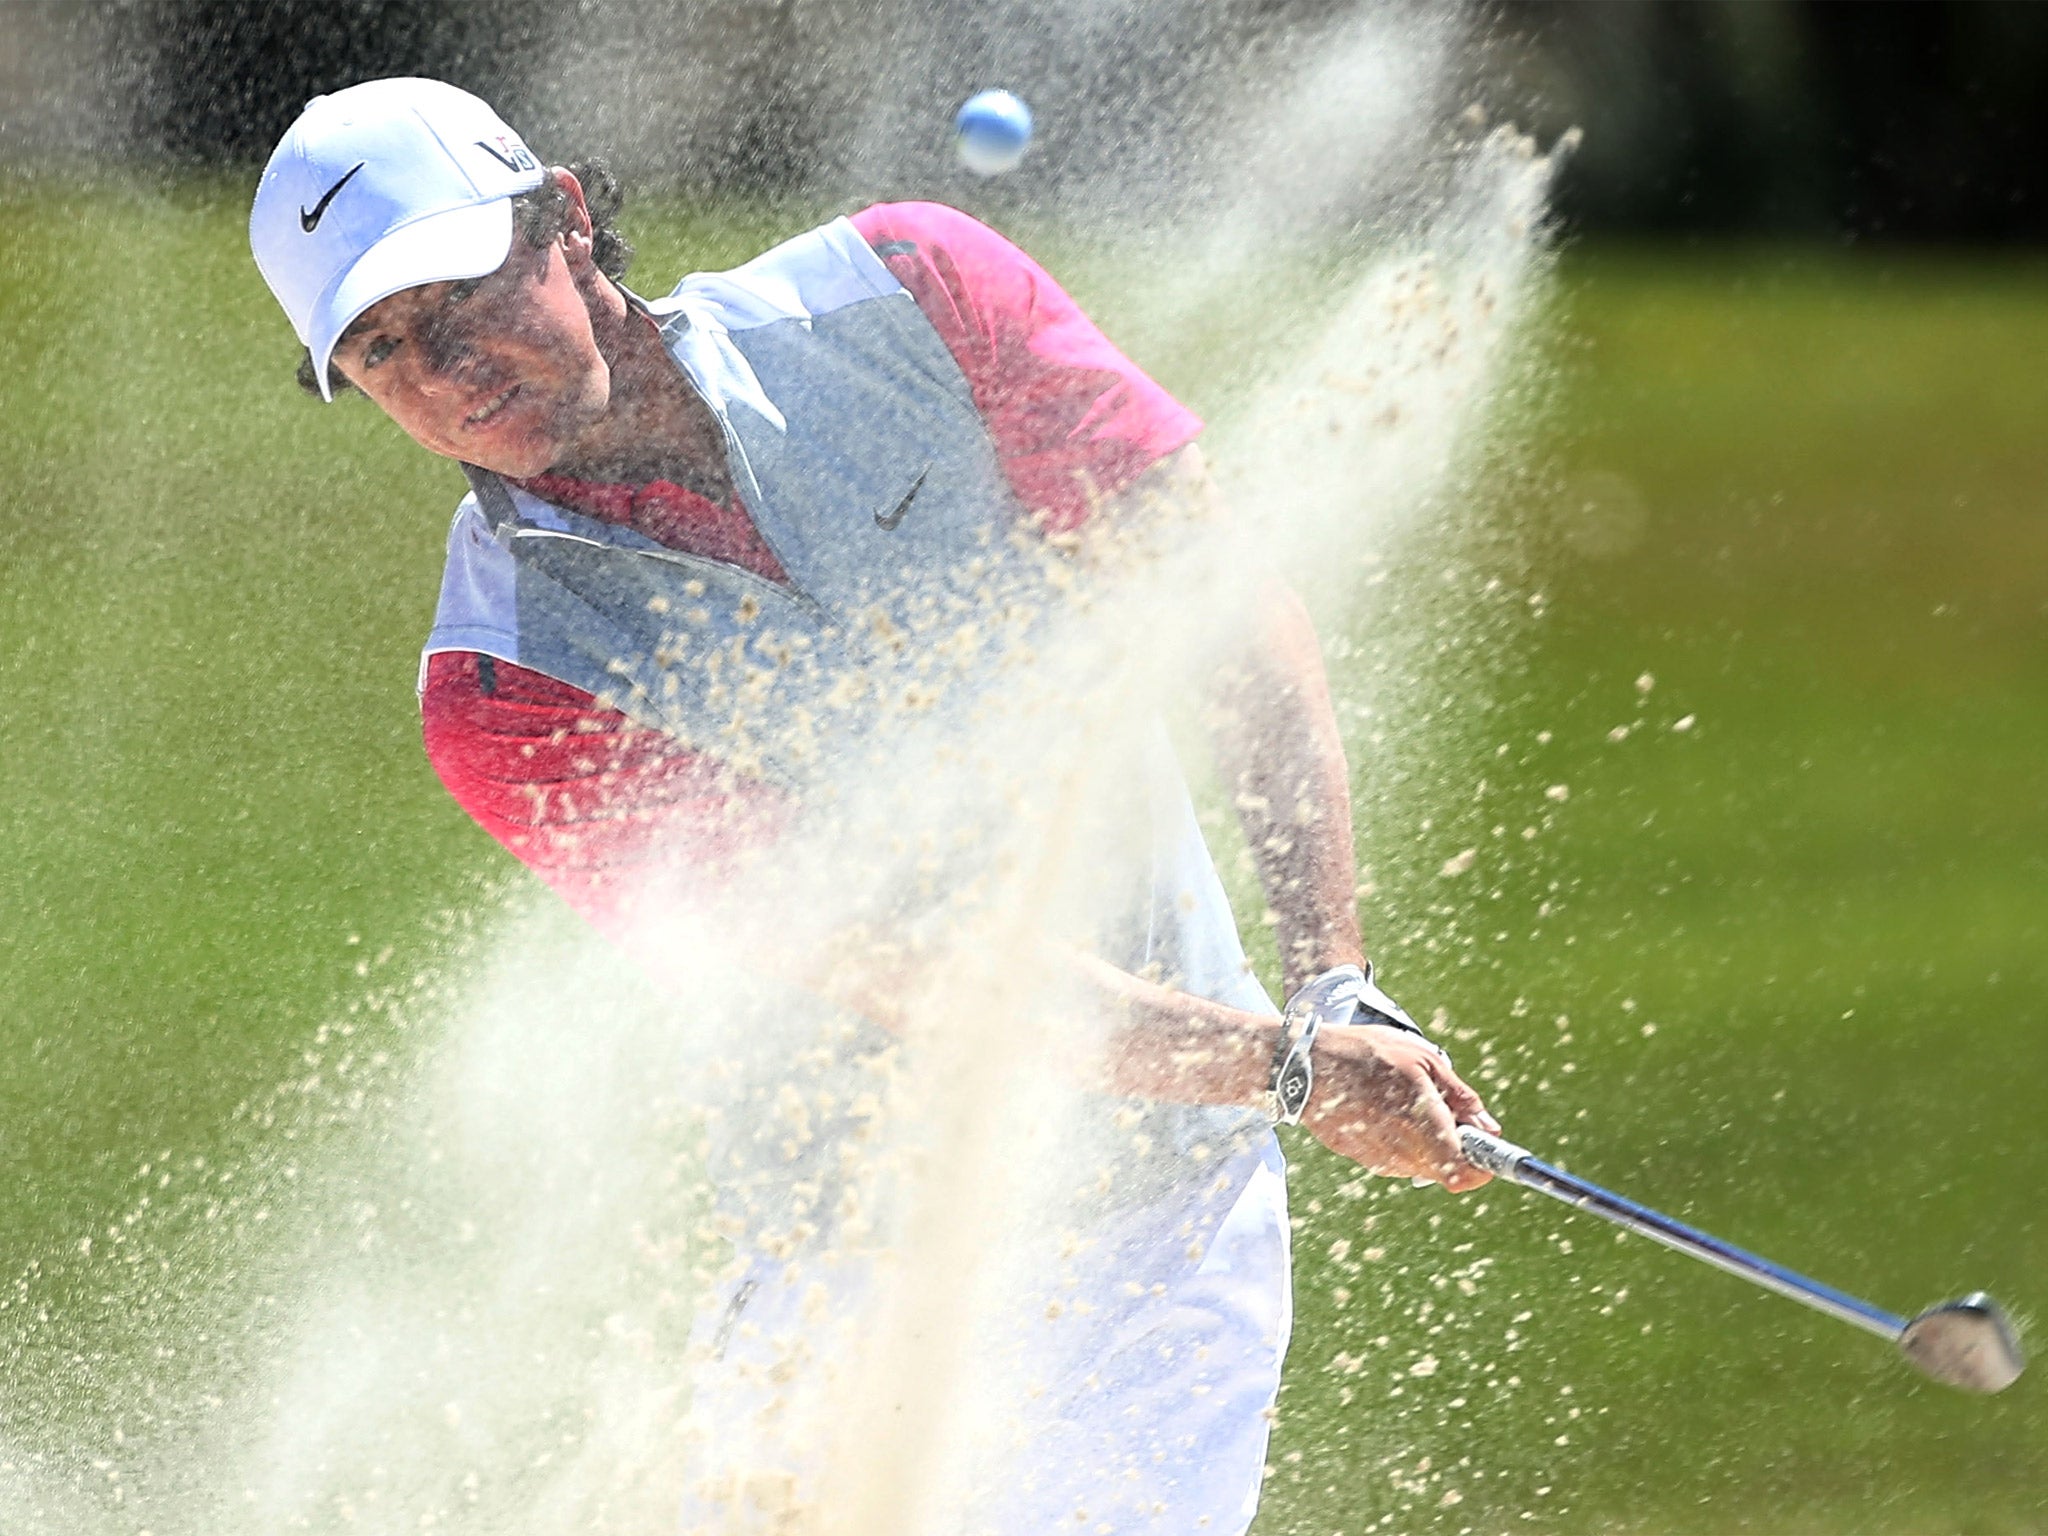 Rory McIlroy blasts out of a sand trap at the 10th hole